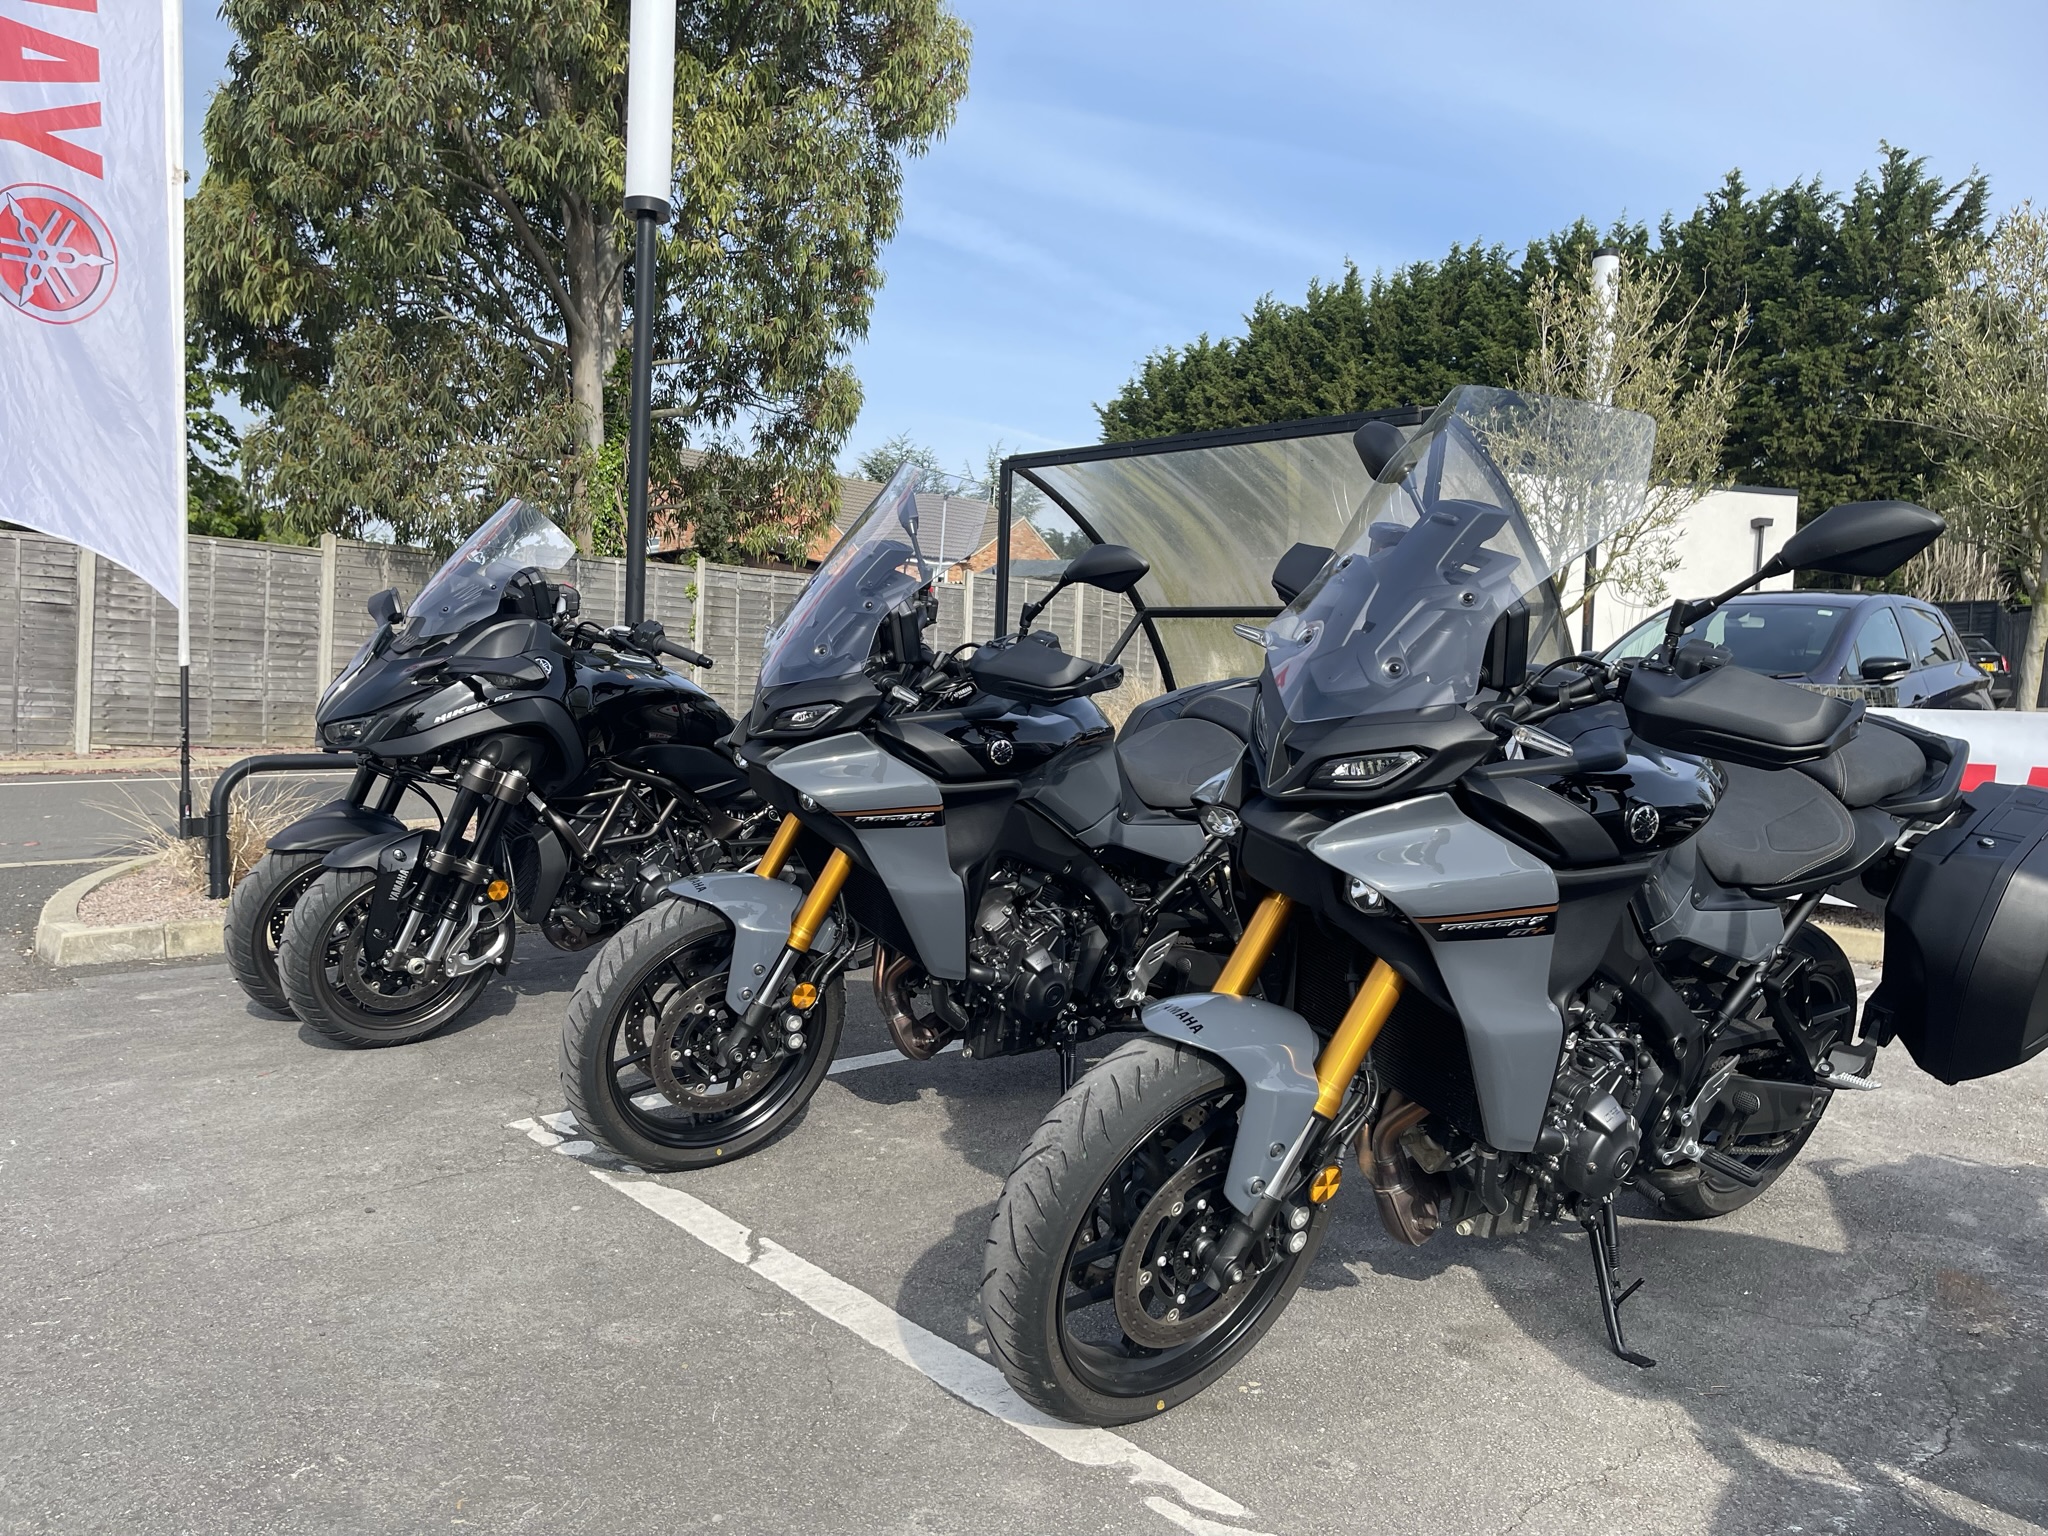 2023 touring options from Yamaha - Tracer 9 GT+ and Niken GT